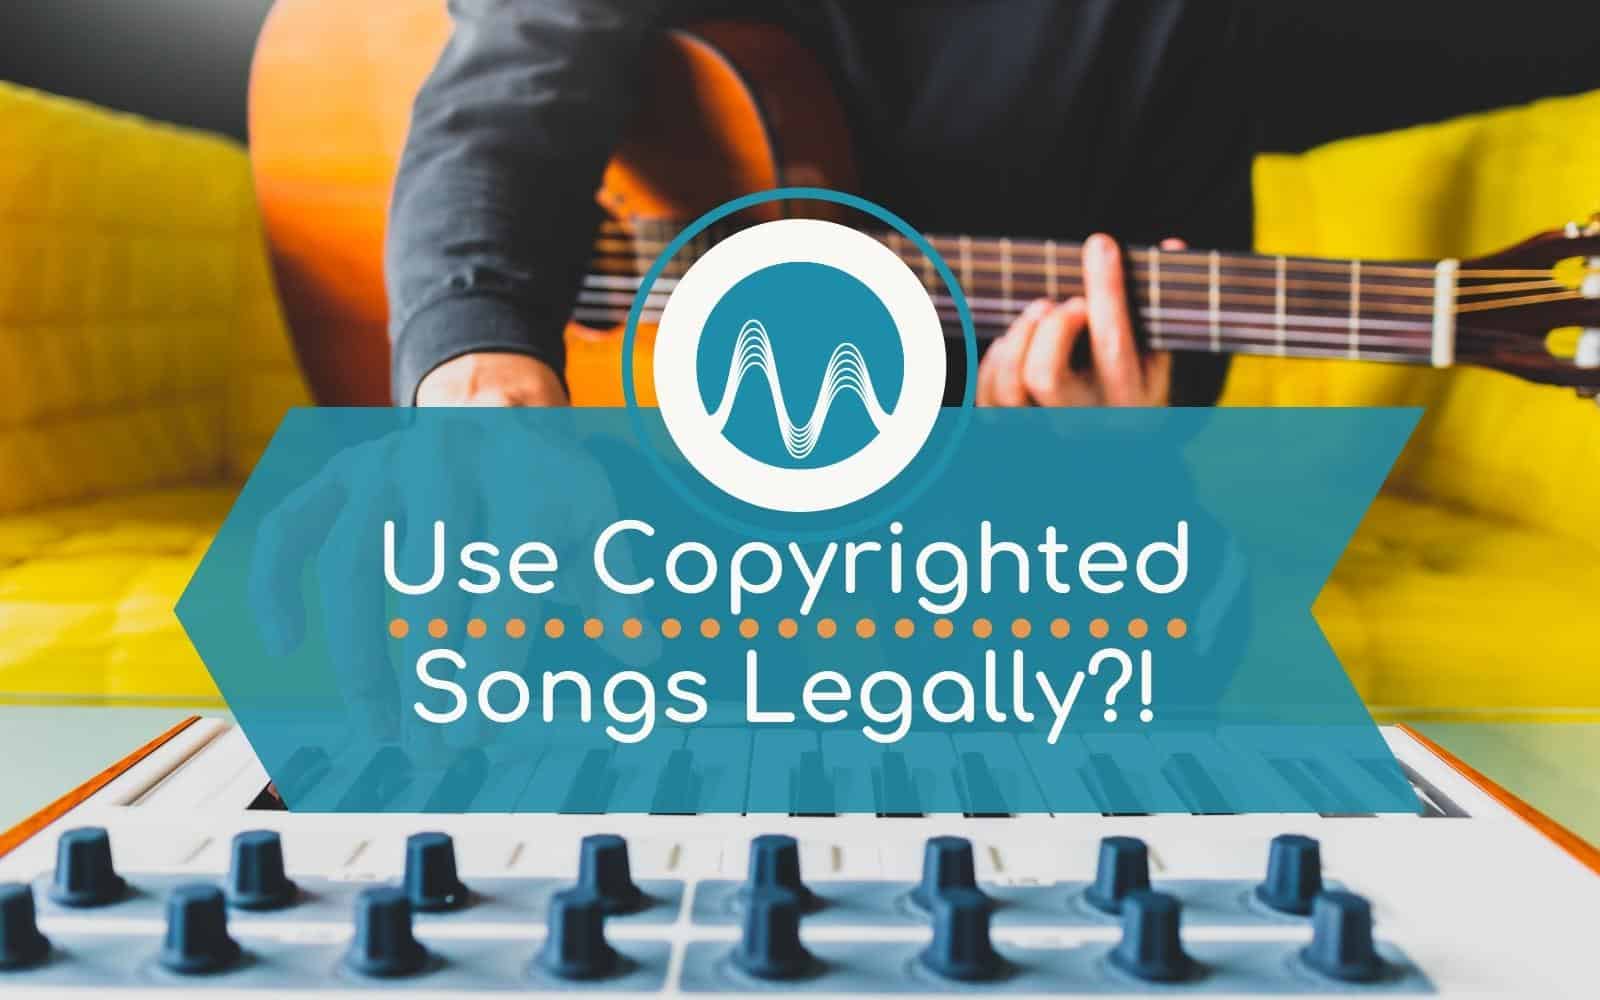 How To Use Copyrighted Songs On YouTube Legally General Copyright Songs YouTube Music Radio Creative